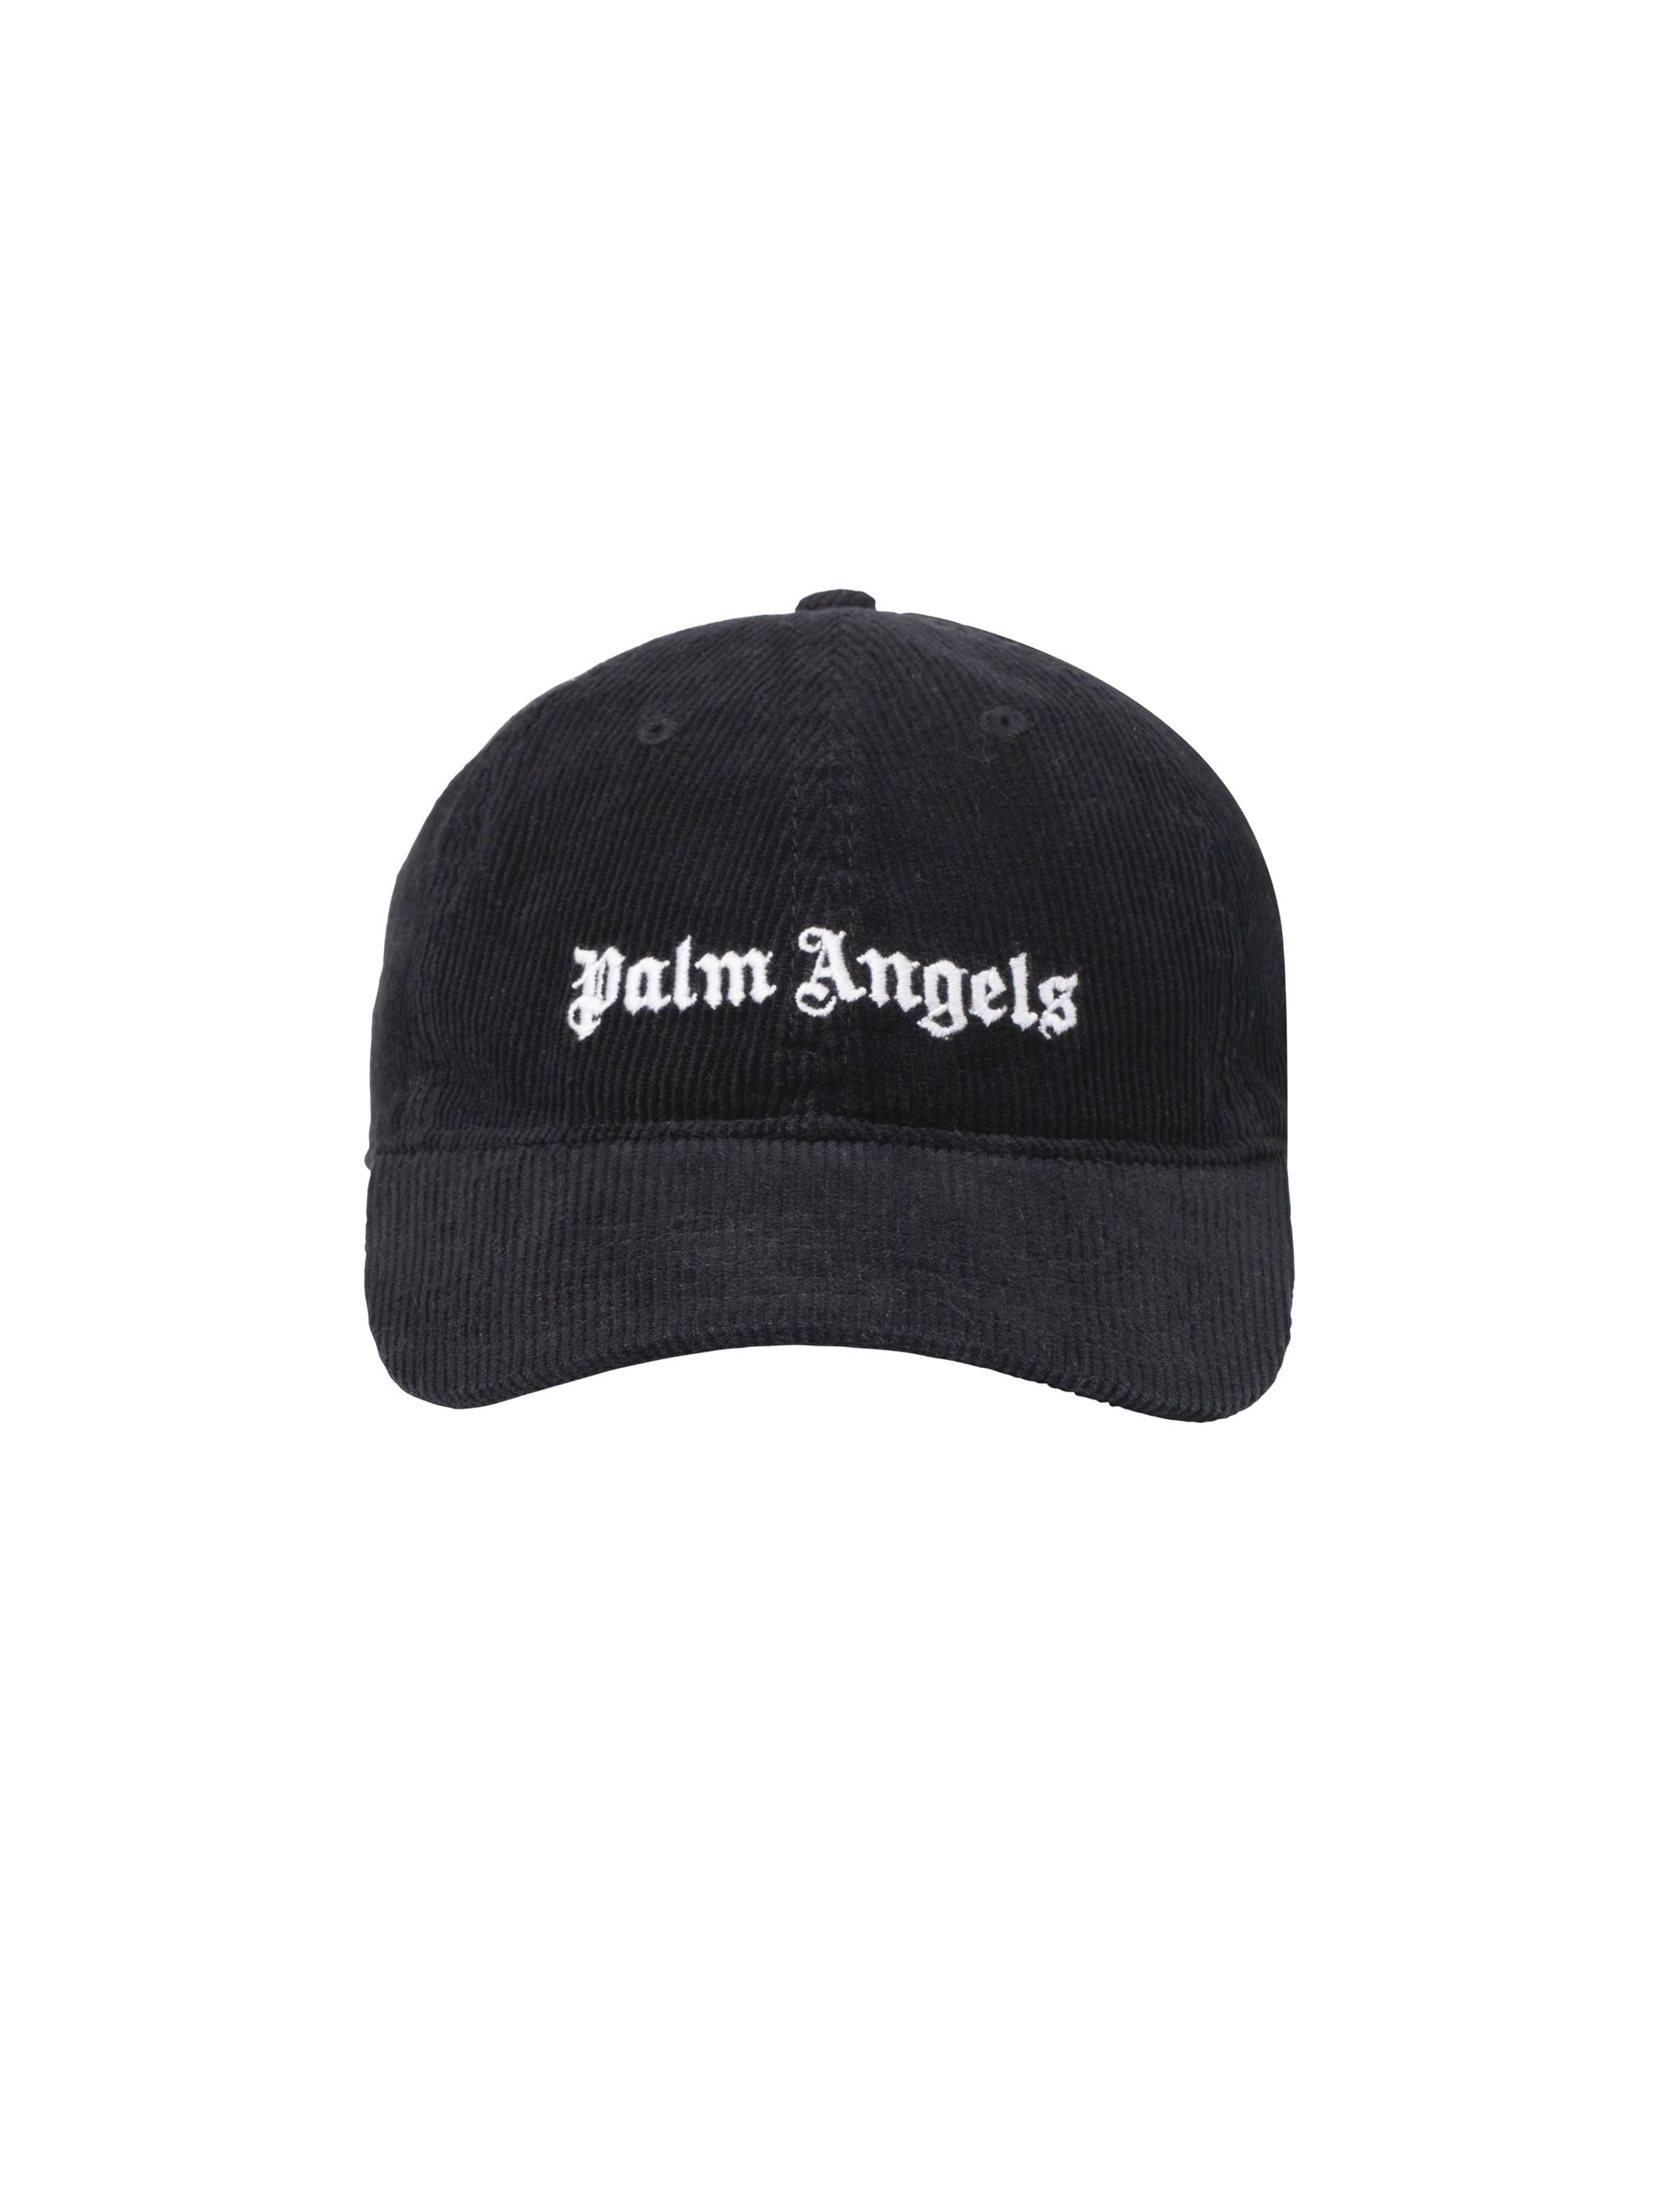 CLASSIC LOGO CAP in black - Palm Angels® Official